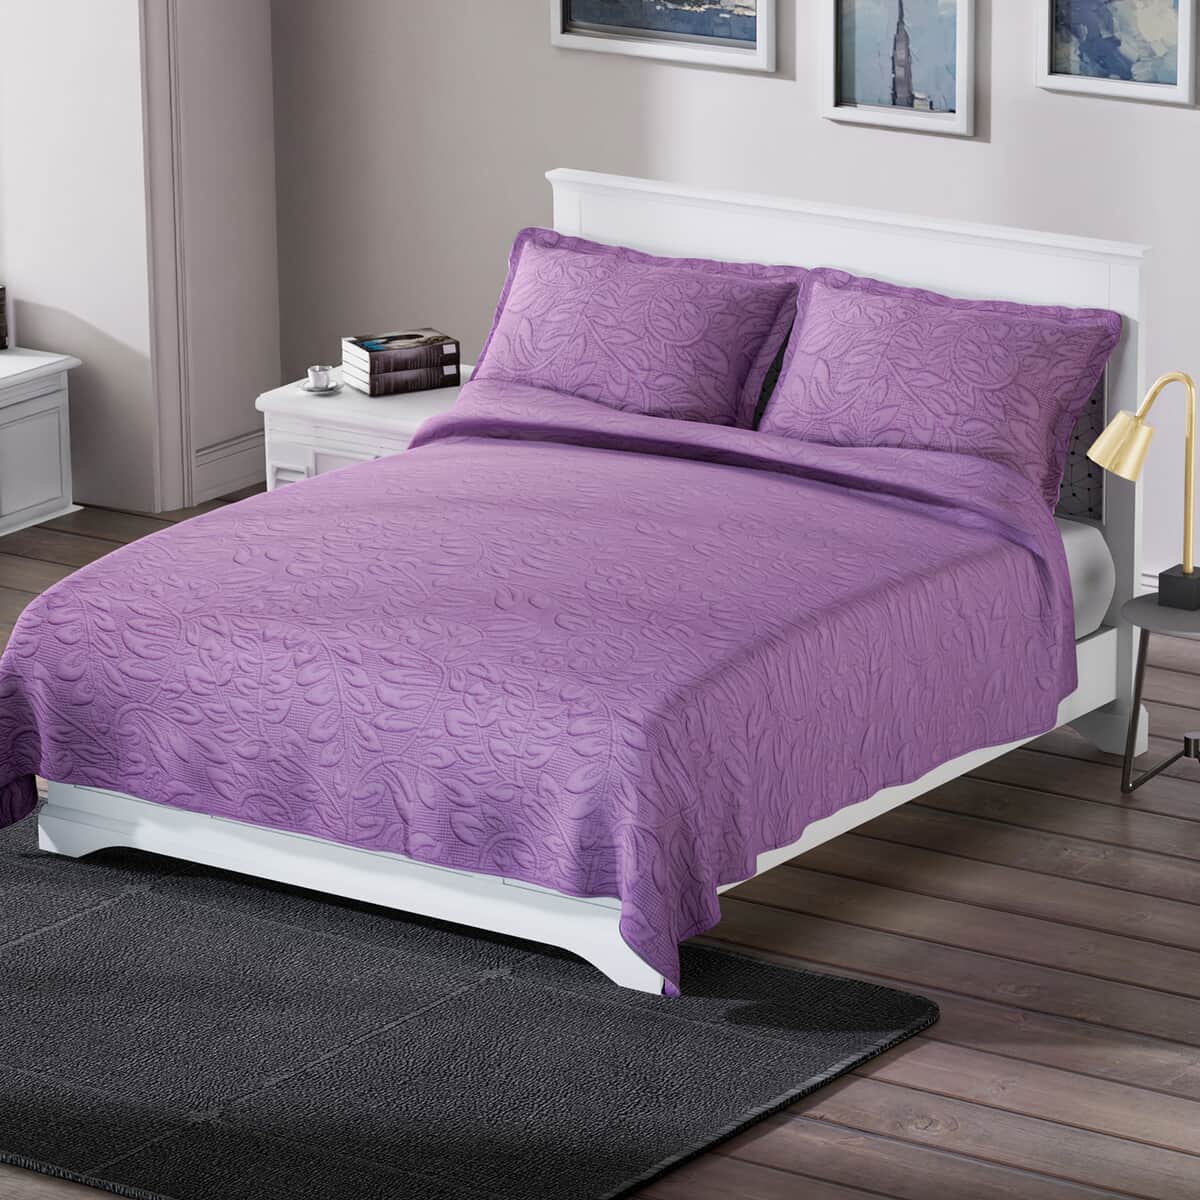 Homesmart Mauve 3D Pinsonic Embossed Pattern Quilt with 2 Shams - Queen (Microfiber) image number 0